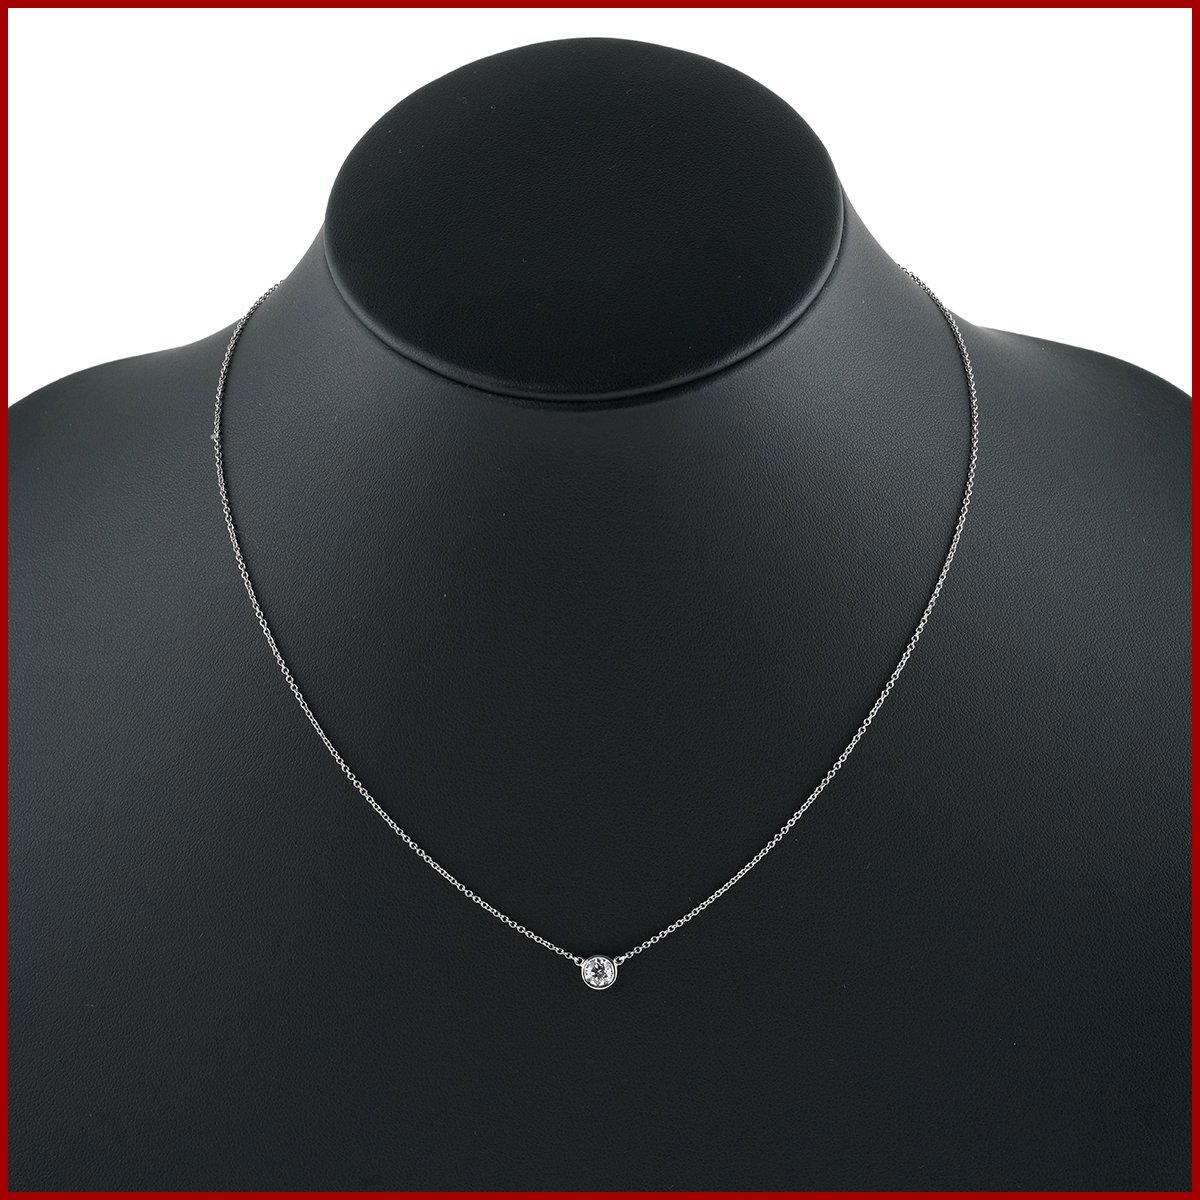  Tiffany visor yard diamond pendant necklace diameter 5.8mm 0.3ct and more Pt950 platinum beautiful goods new goods has been finished serial equipped 